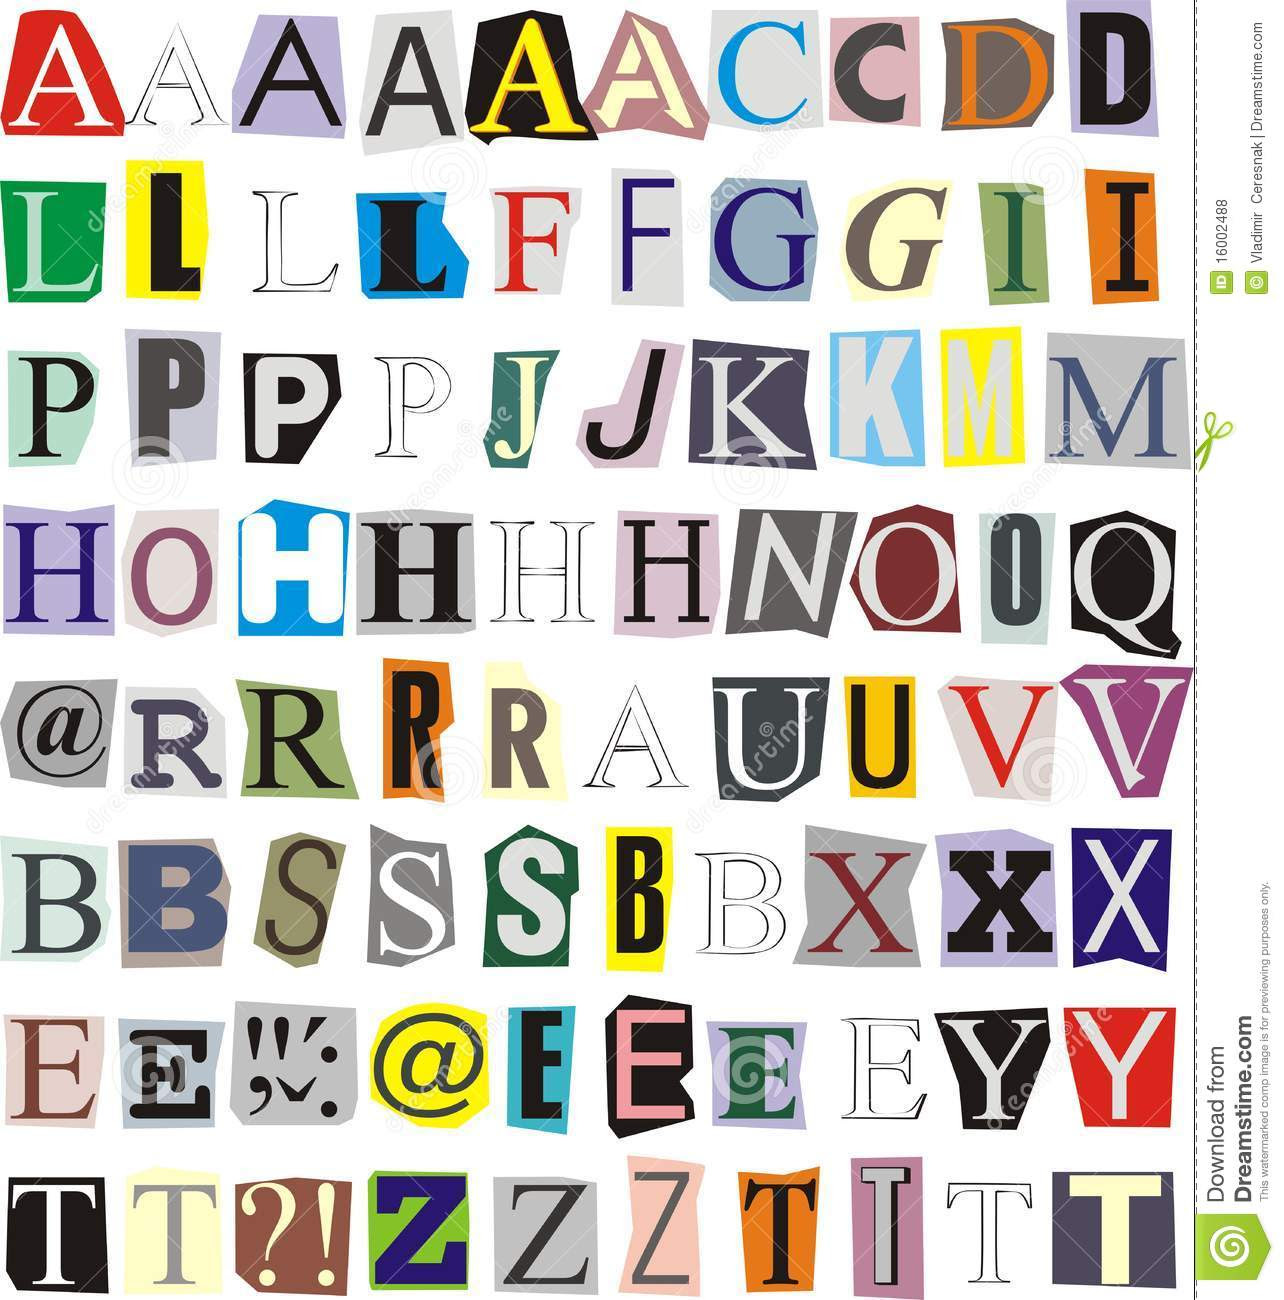 Printable Letters Cut Out 6 Best Images of Printable Cut Out Letters